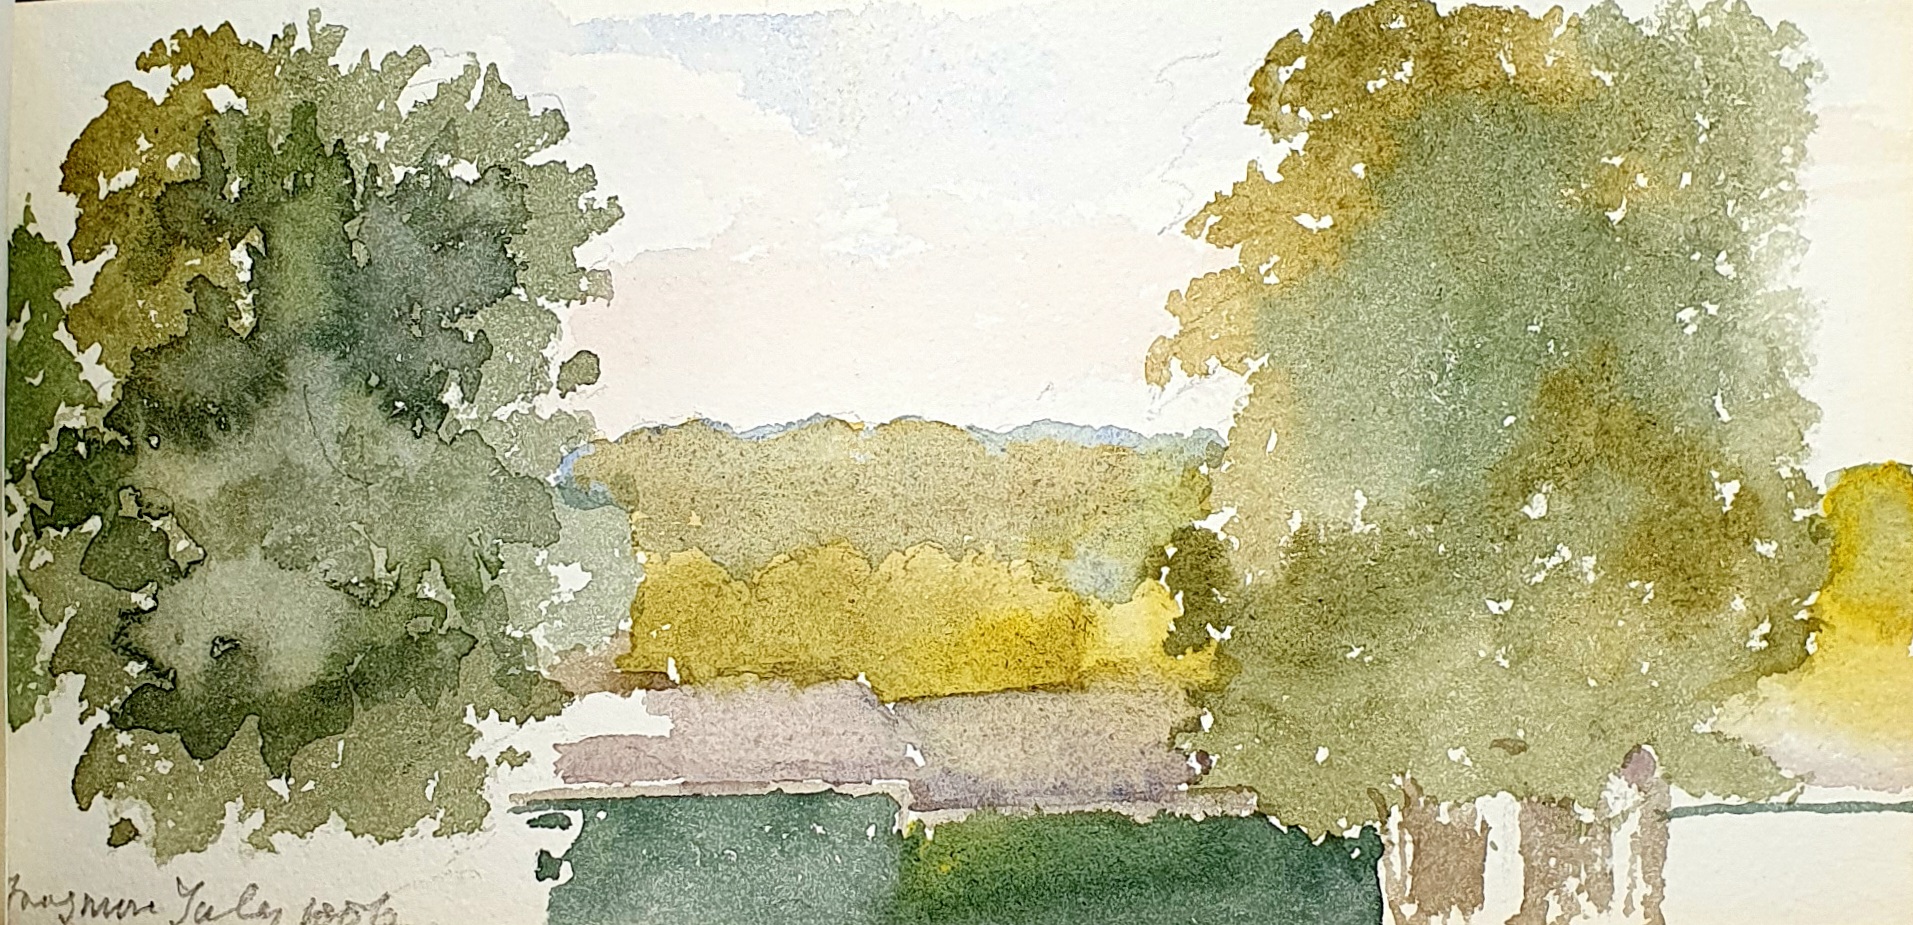 Watercolour of Frogmore House by Queen Victoria